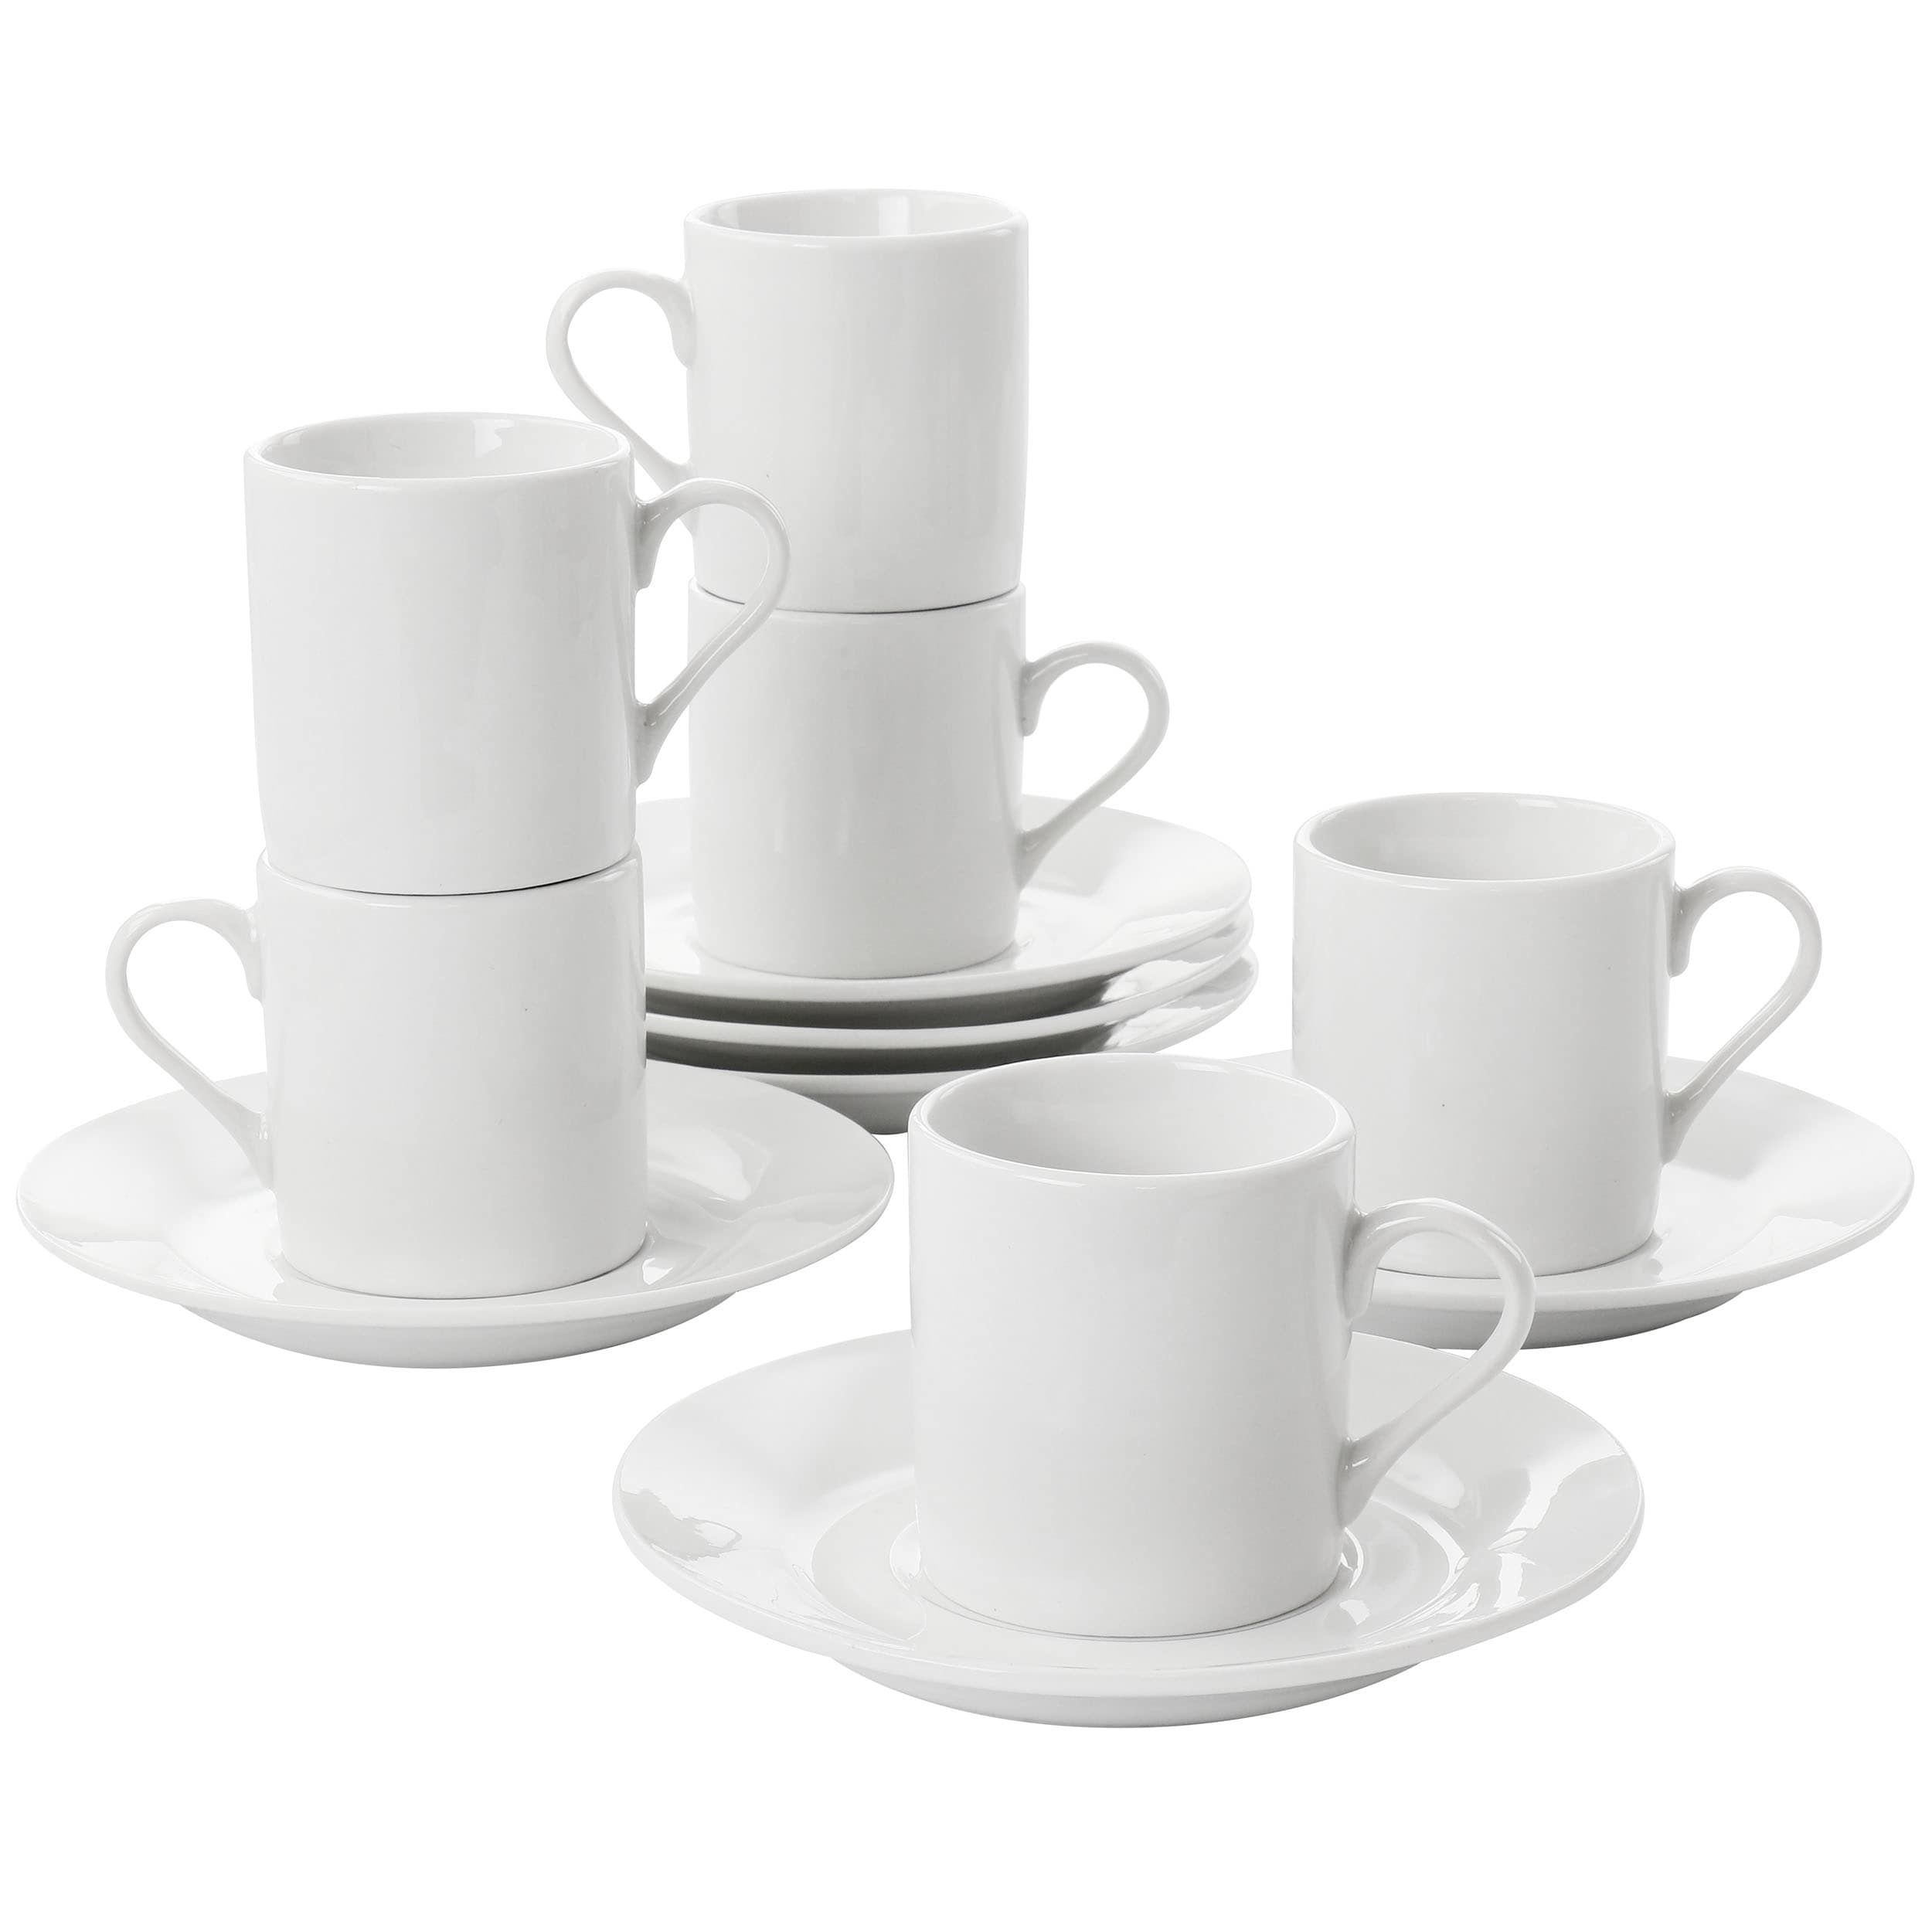 https://ak1.ostkcdn.com/images/products/is/images/direct/fca5424bad94f53f918f6cde4fbc96b5a83a40b1/Fine-Ceramic-6-Piece-Espresso-Demi-Cup-and-Saucer-Set-in-White.jpg